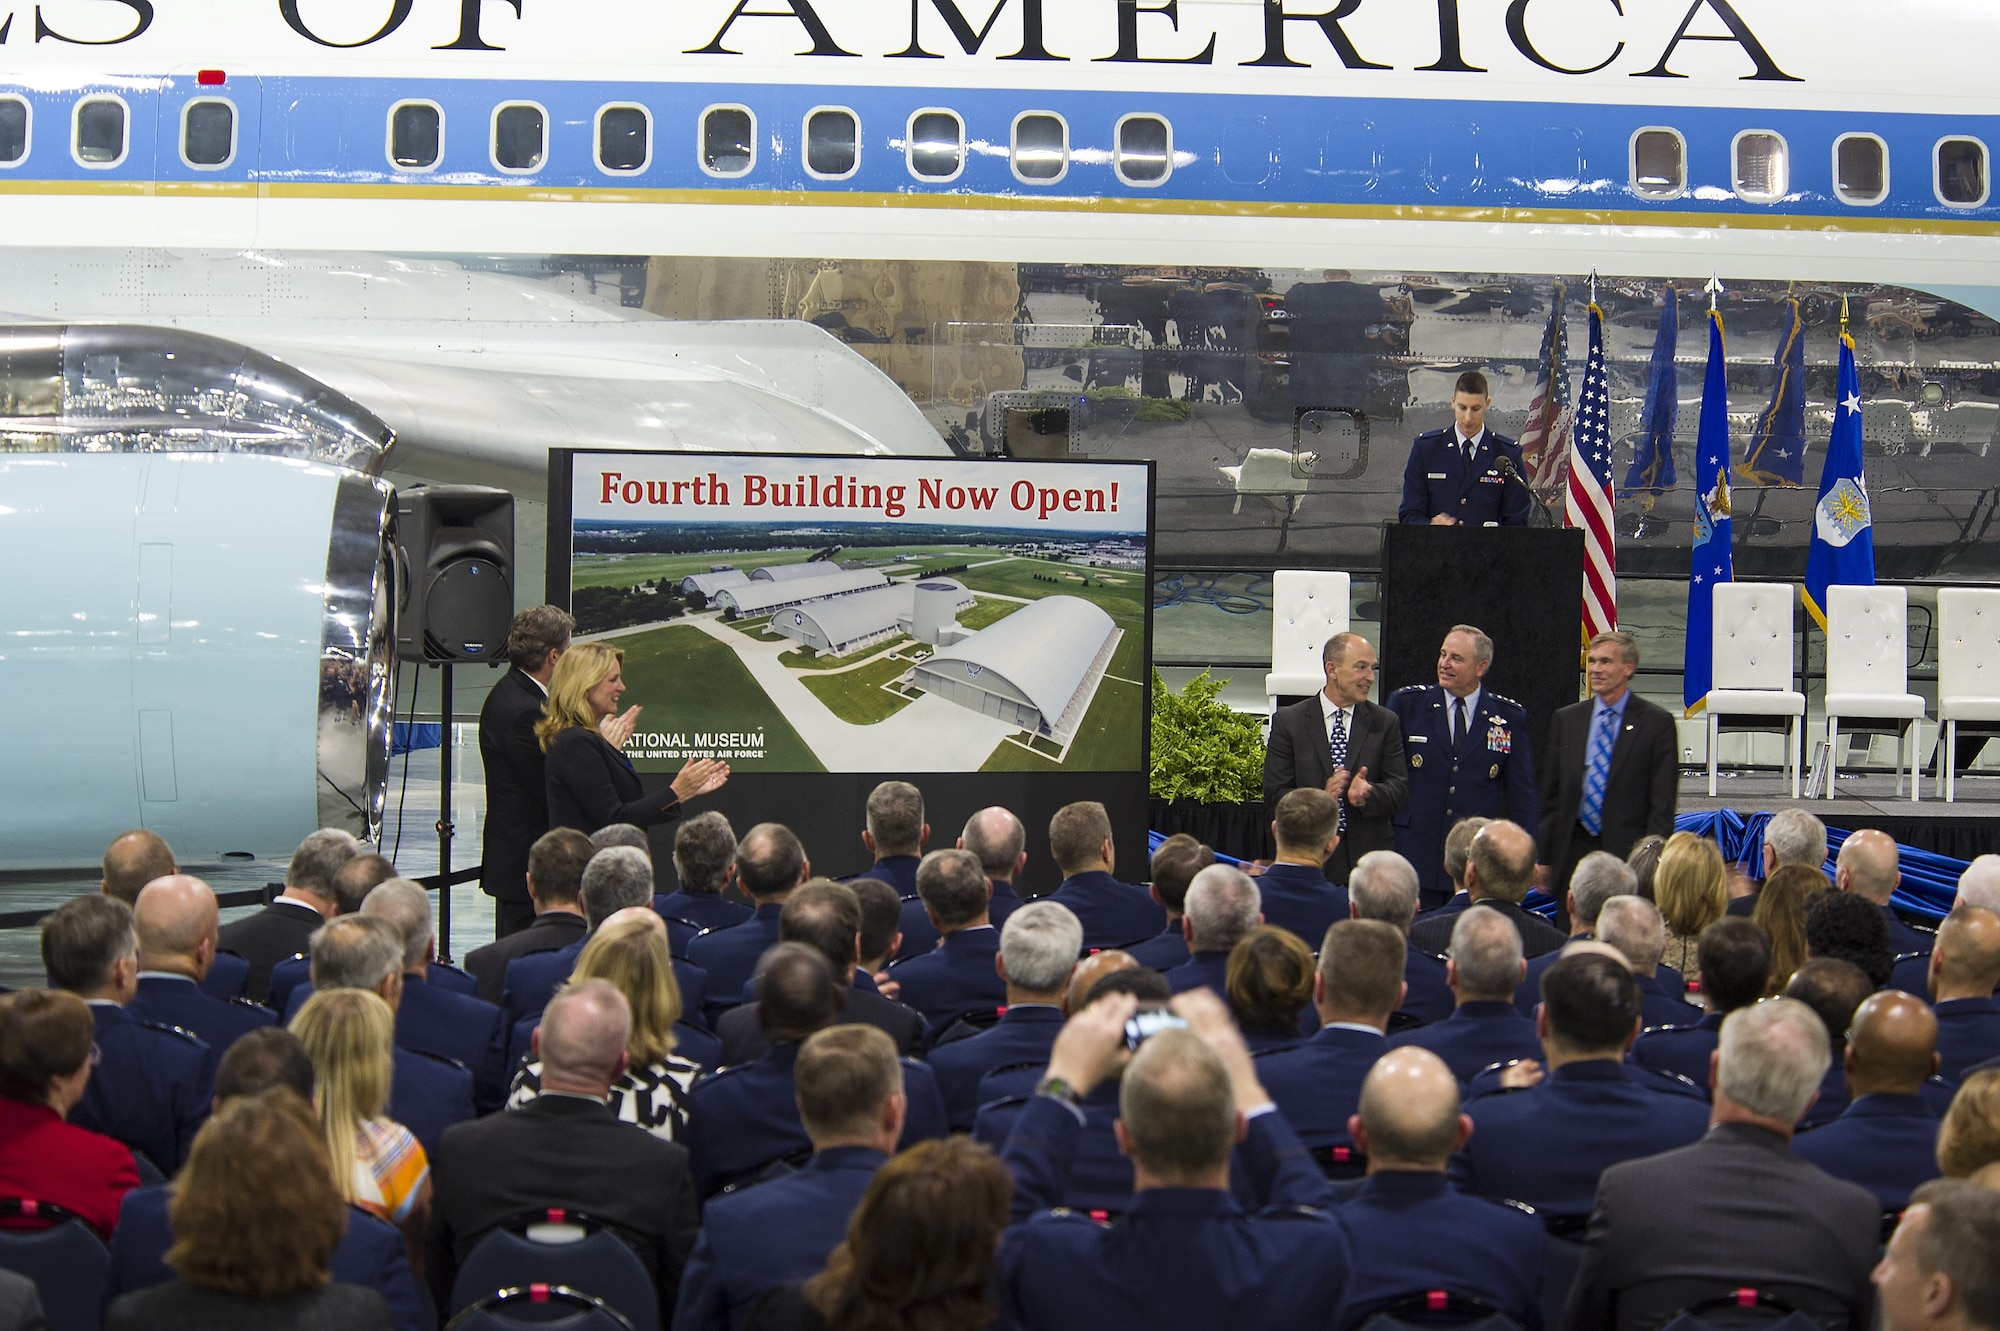 DAYTON, Ohio -- The fourth building grand opening ceremony for the new 224,000 square foot building was held on June 7, 2016 at the National Museum of the U.S. Air Force. (From left to right) Congressman Mike Turner, Secretary of the Air Force Deborah Lee James, Air Force Museum Foundation, Inc. Chairman, Board of Trustees, Philip L. Soucy, Chief of Staff of the U.S. Air Force Gen. Mark A. Welsh III, and the Director of the National Museum of the U.S. Air Force, Lt. Gen.(Ret.) Jack Hudson. (U.S Air Force photo by Ken LaRock)